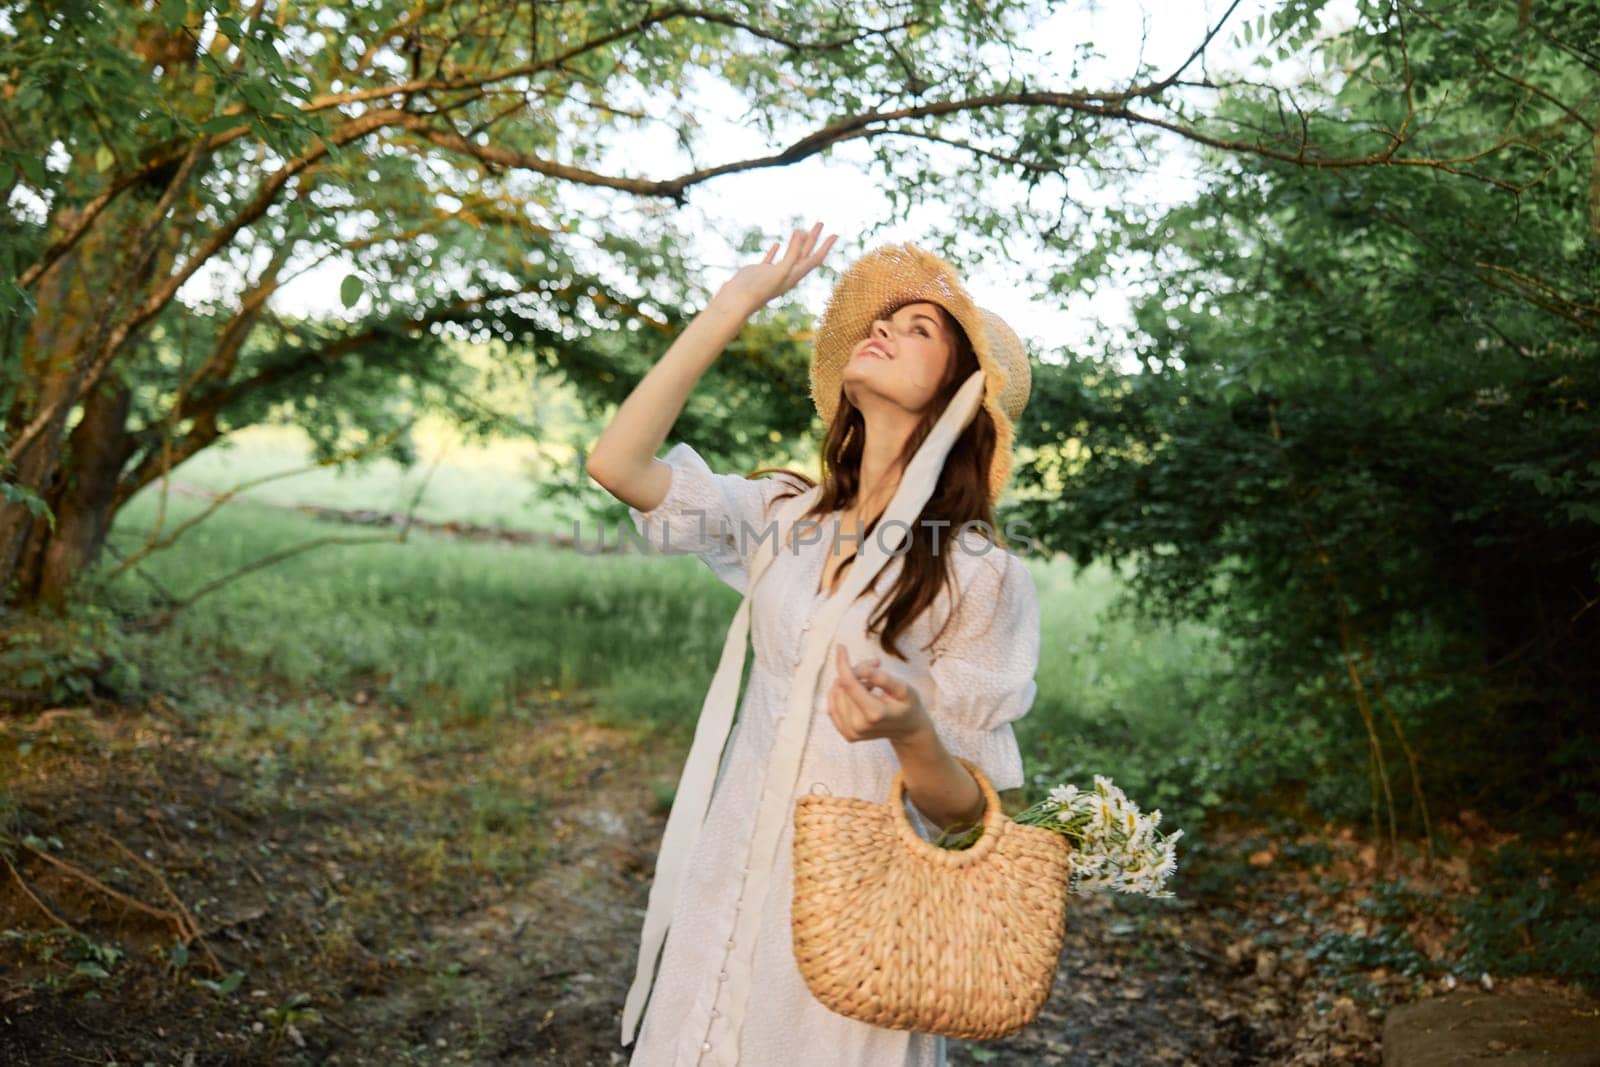 happy, smiling woman in a wicker hat with a basket of daisies in her hands walks through the forest by Vichizh